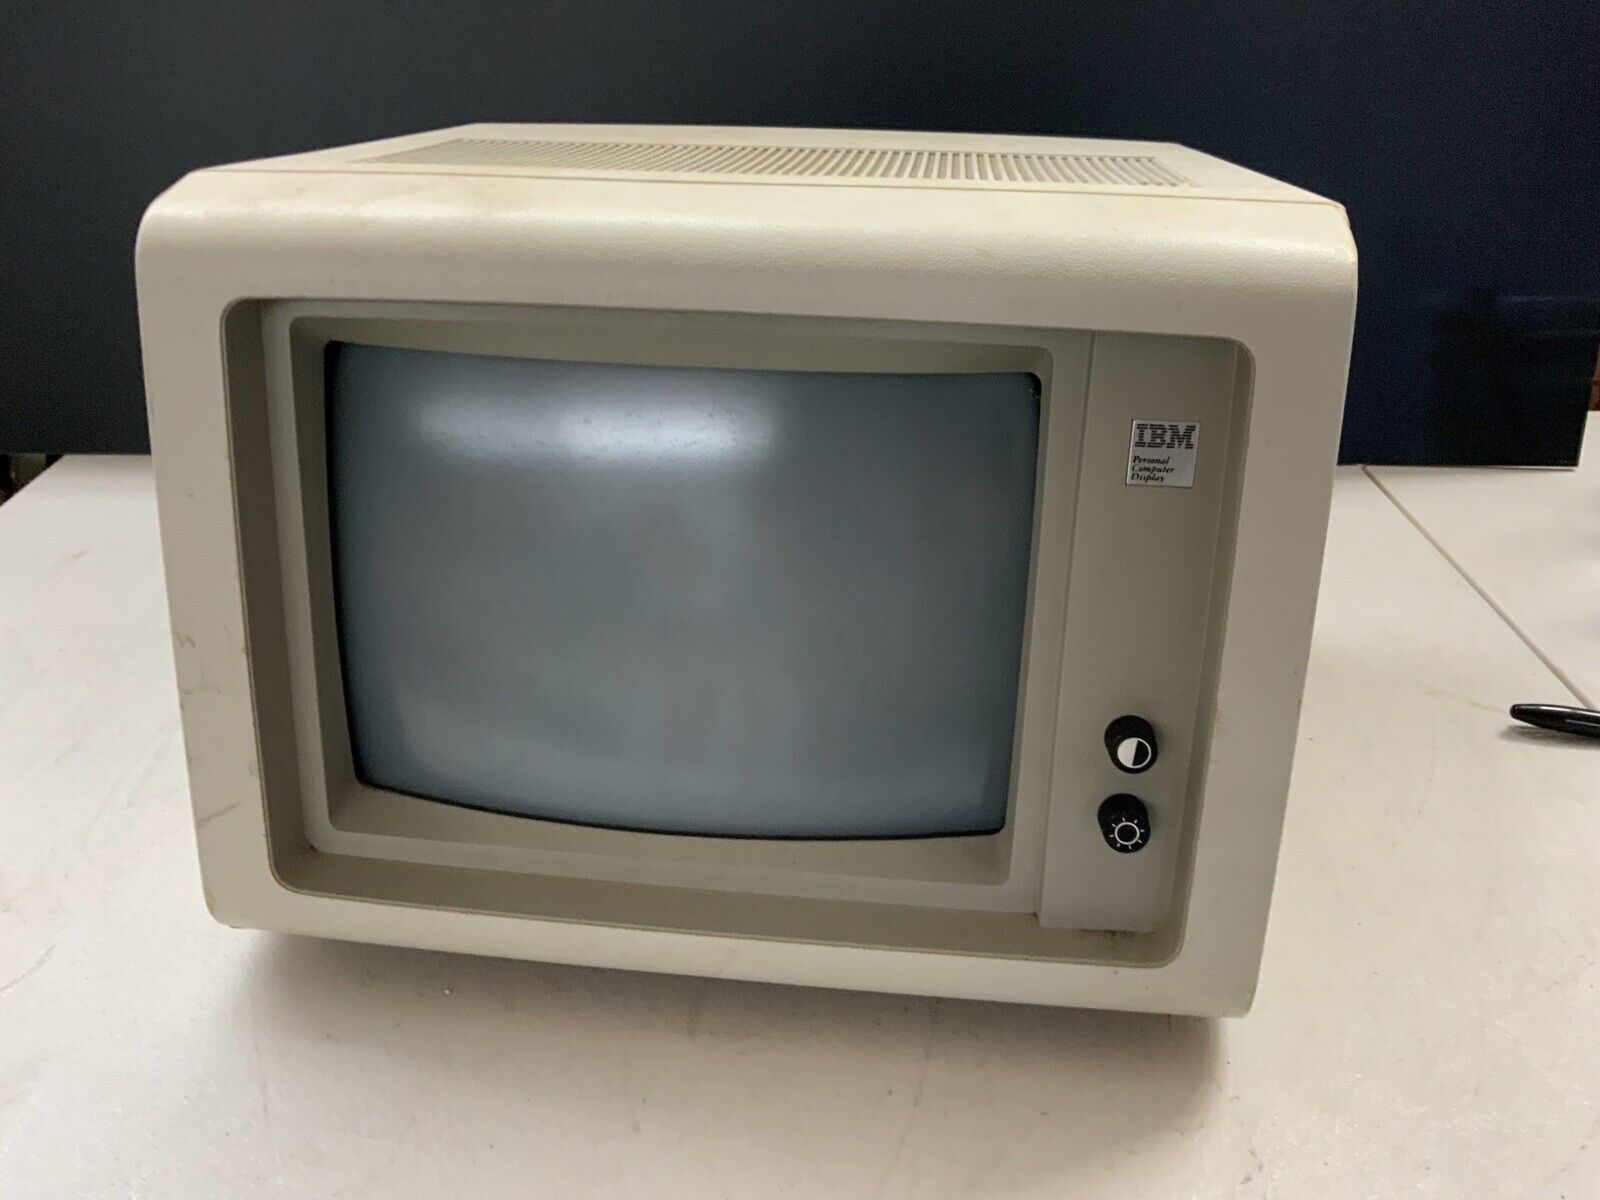 Vintage IBM 5151 Monitor for Personal Computer (A9)